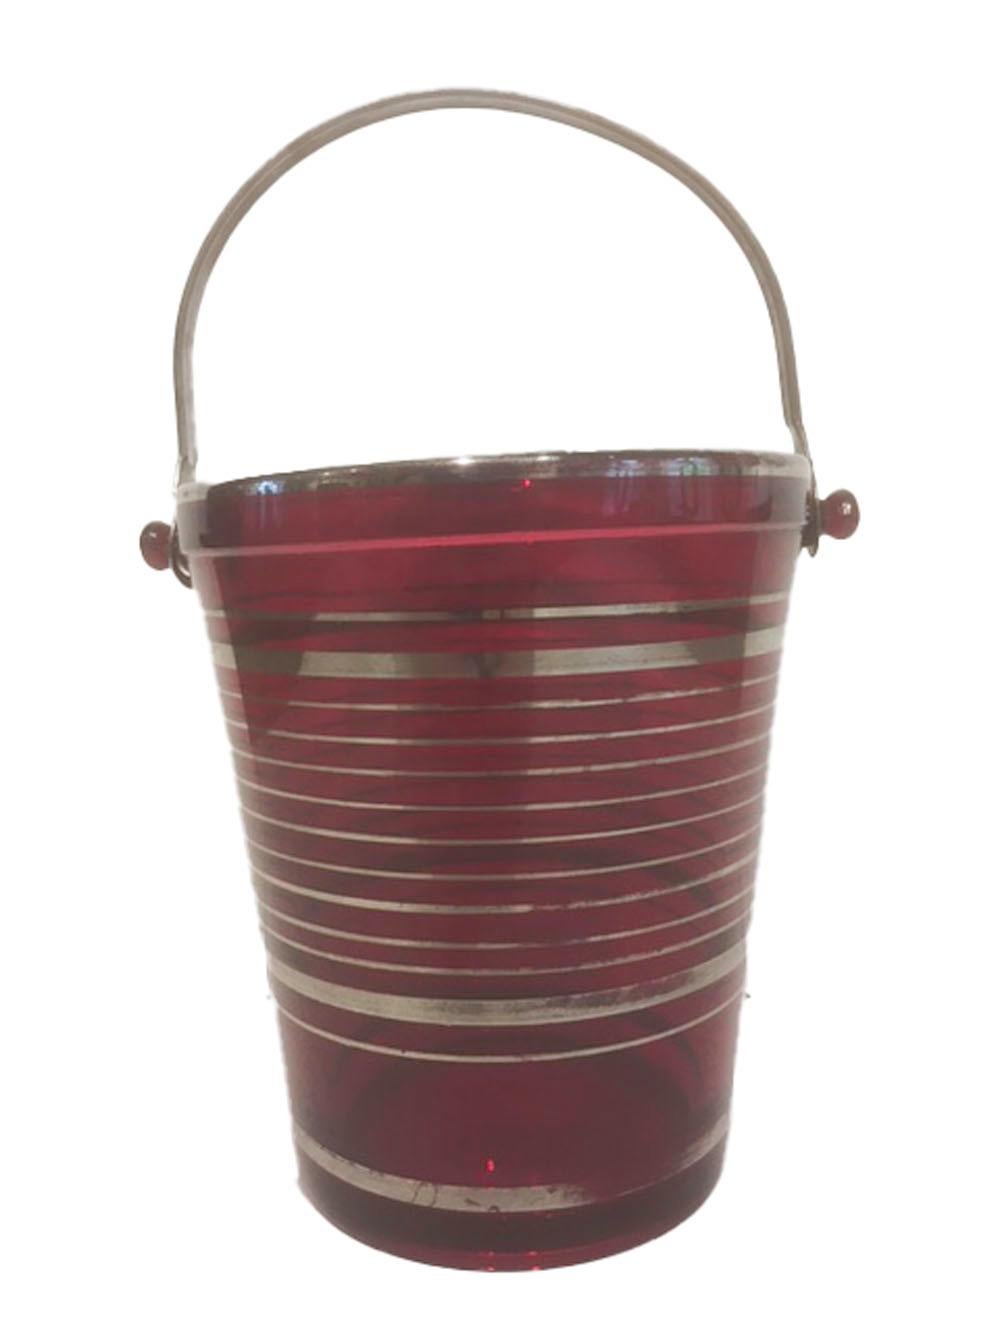 20th Century Art Deco Ruby Red Glass Pail-Form Ice Bucket with Silver Bands & Chromed Handle